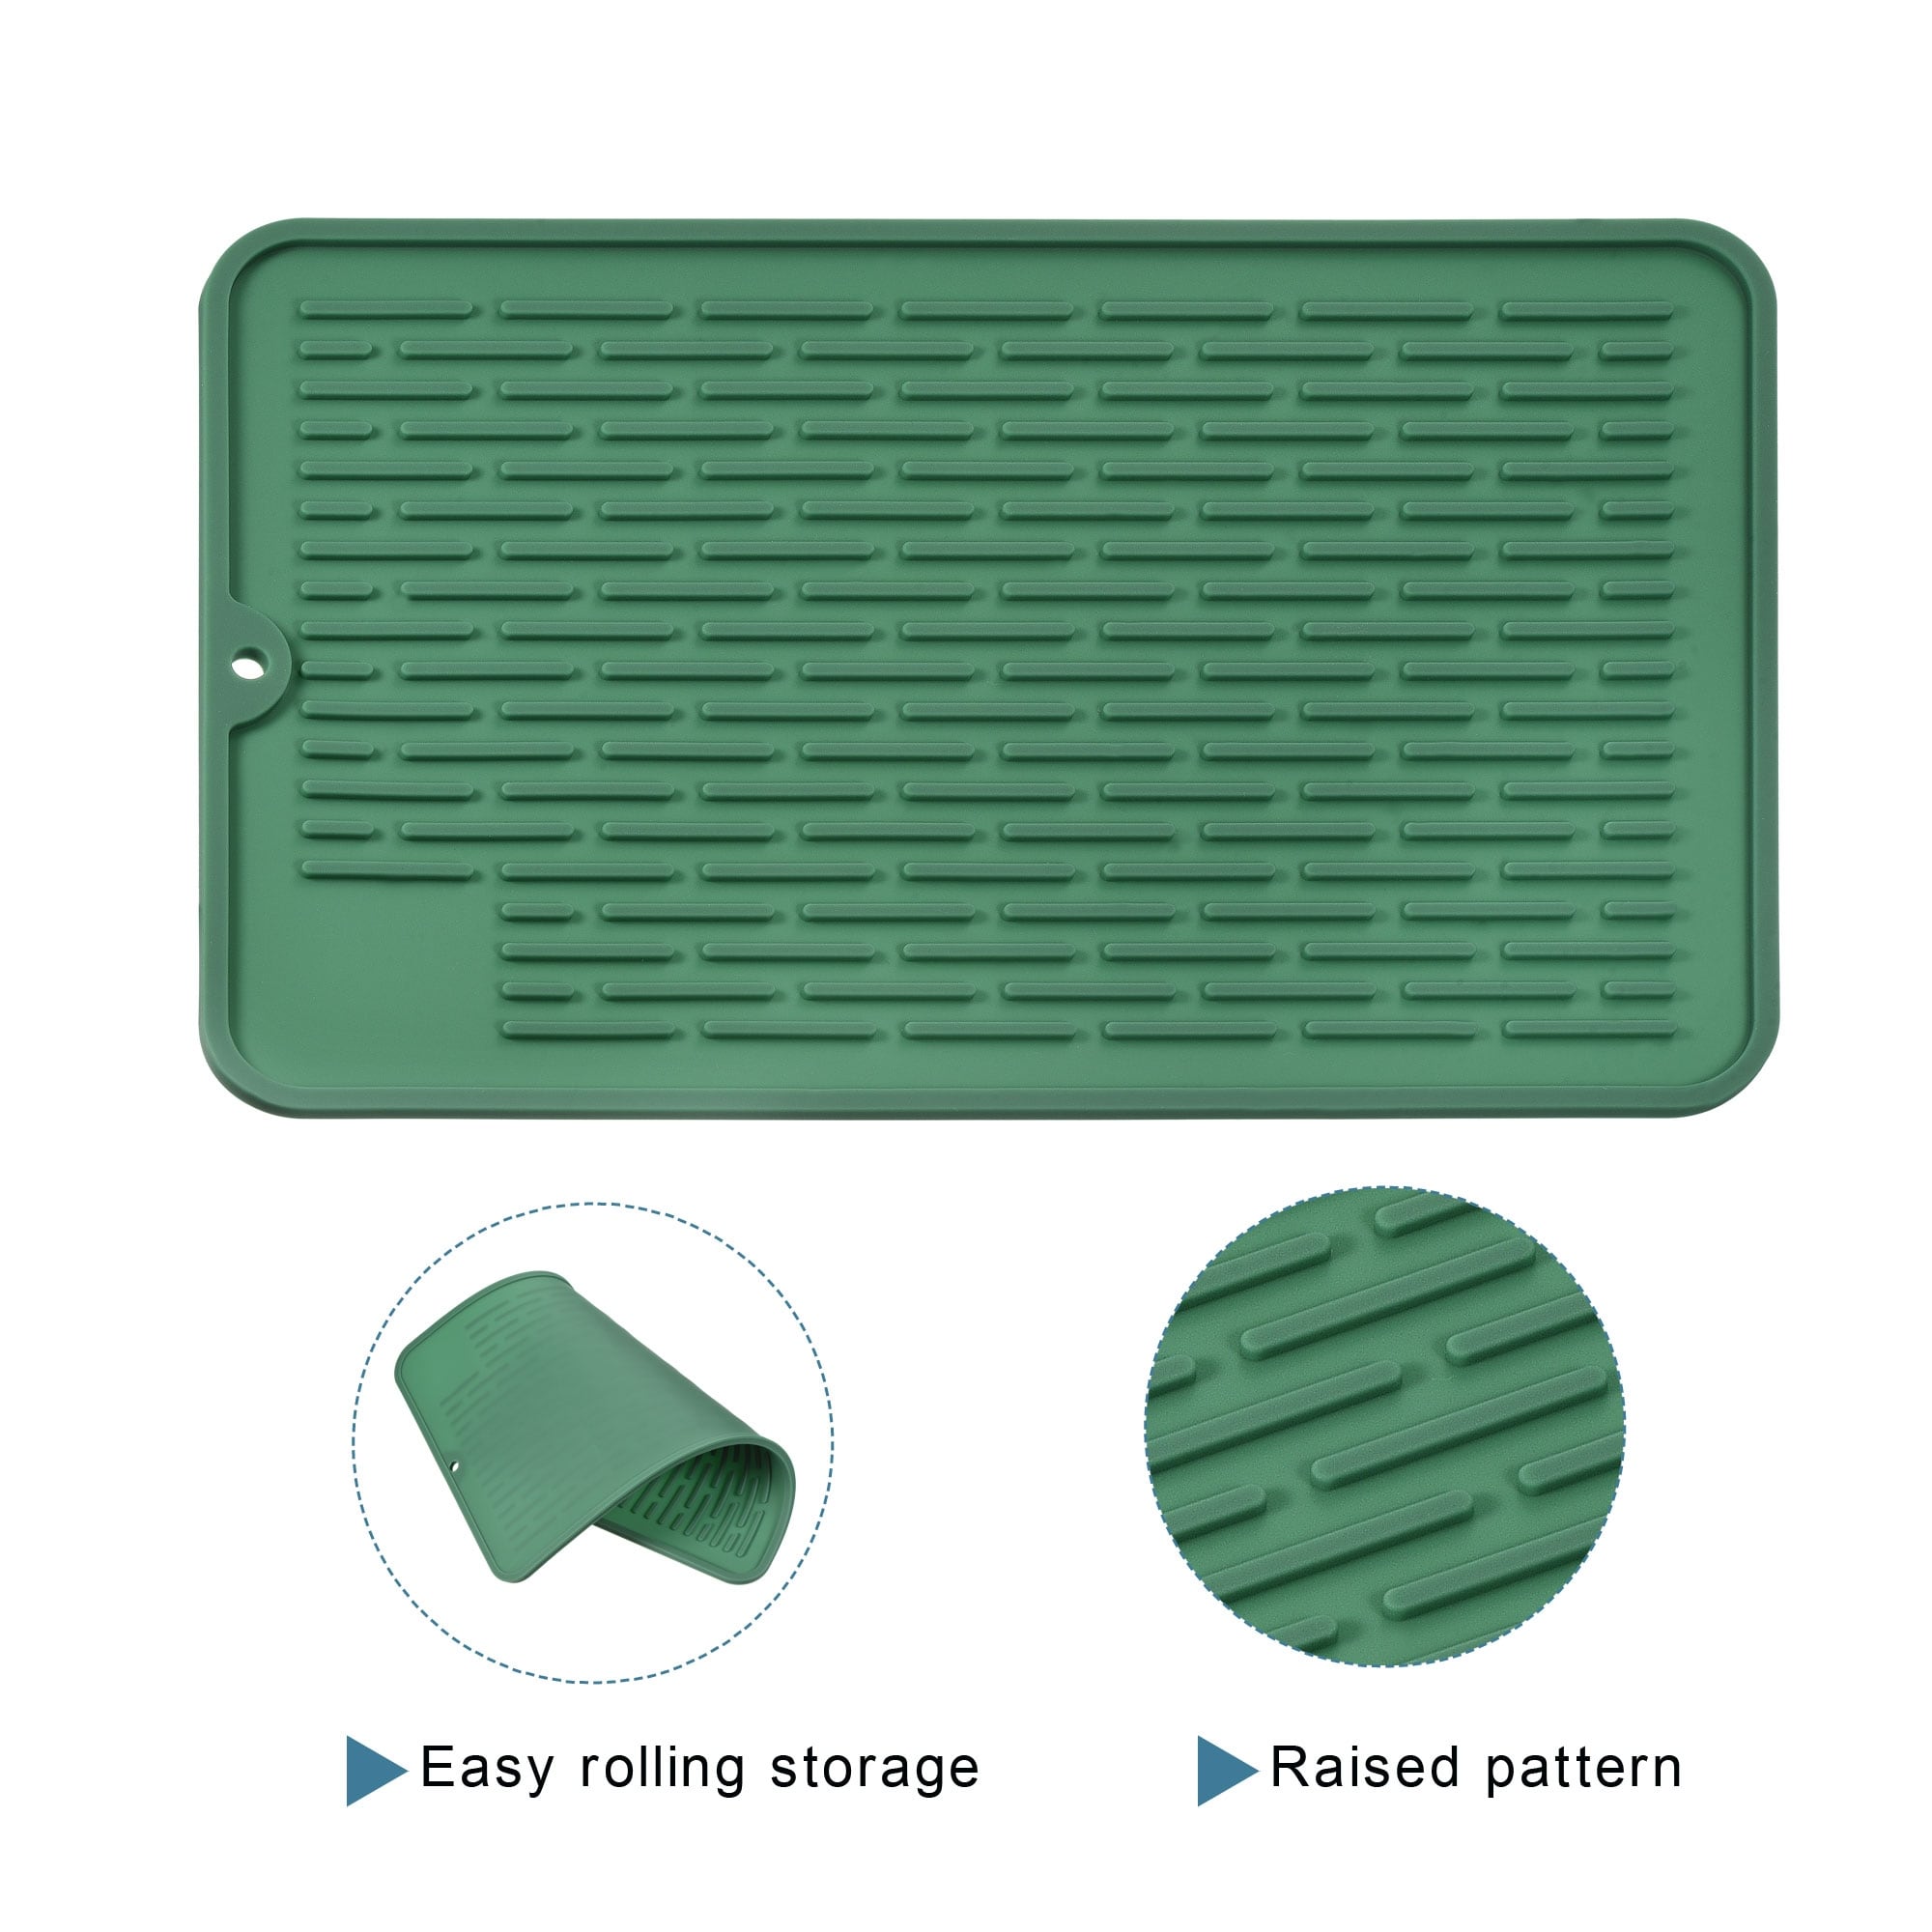 https://ak1.ostkcdn.com/images/products/is/images/direct/39396d52a54a7c15a5365a0bfef674605f67bae2/Silicone-Dish-Drying-Mat-Set%2C-11.8%22x7.9%22-Dish-Drain-Pad-Heat-Resistant.jpg